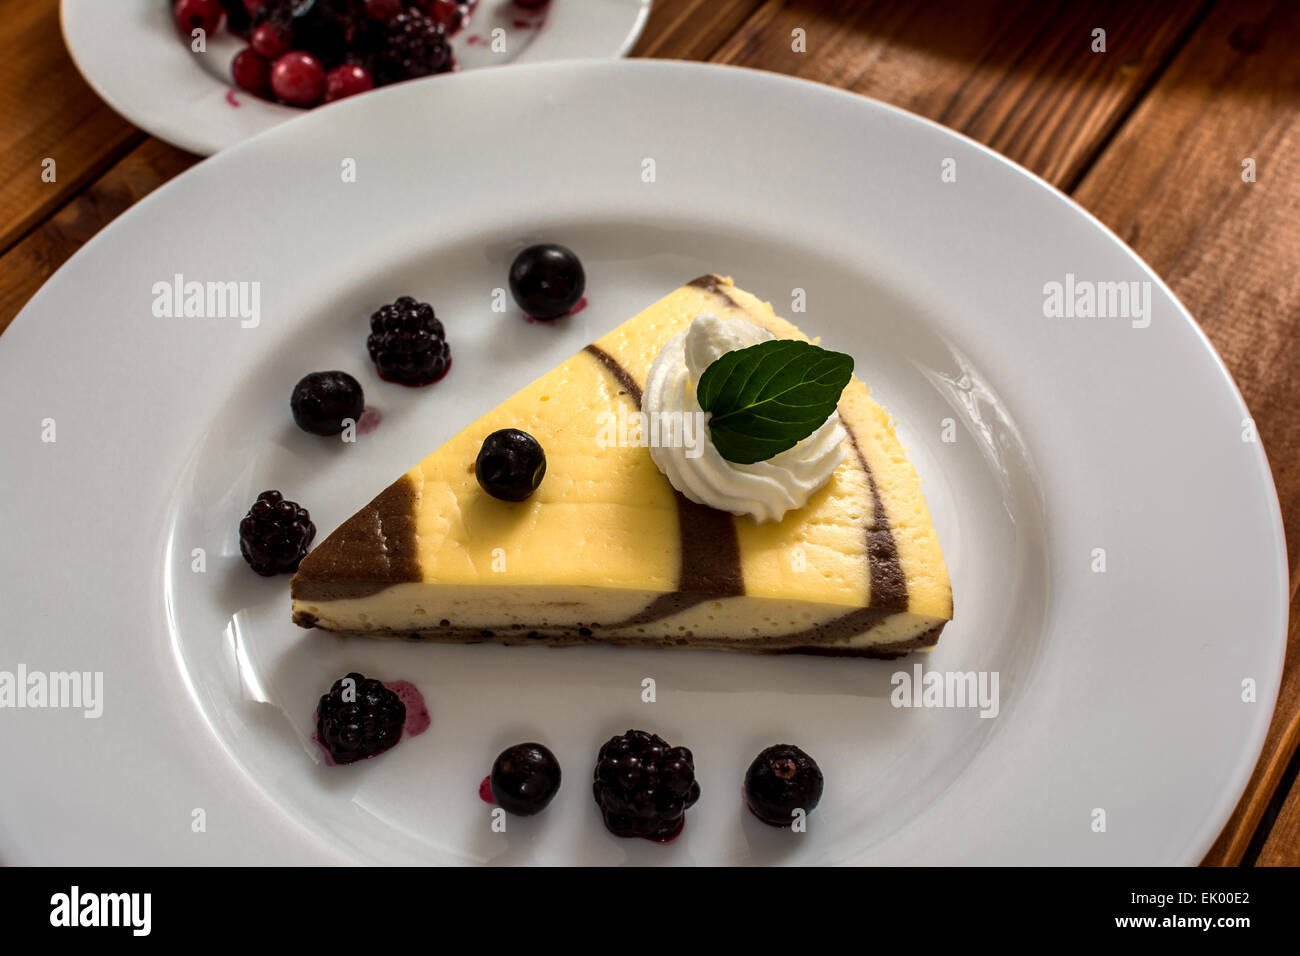 Curd and cocoa dessert with blueberries and blackberry Stock Photo